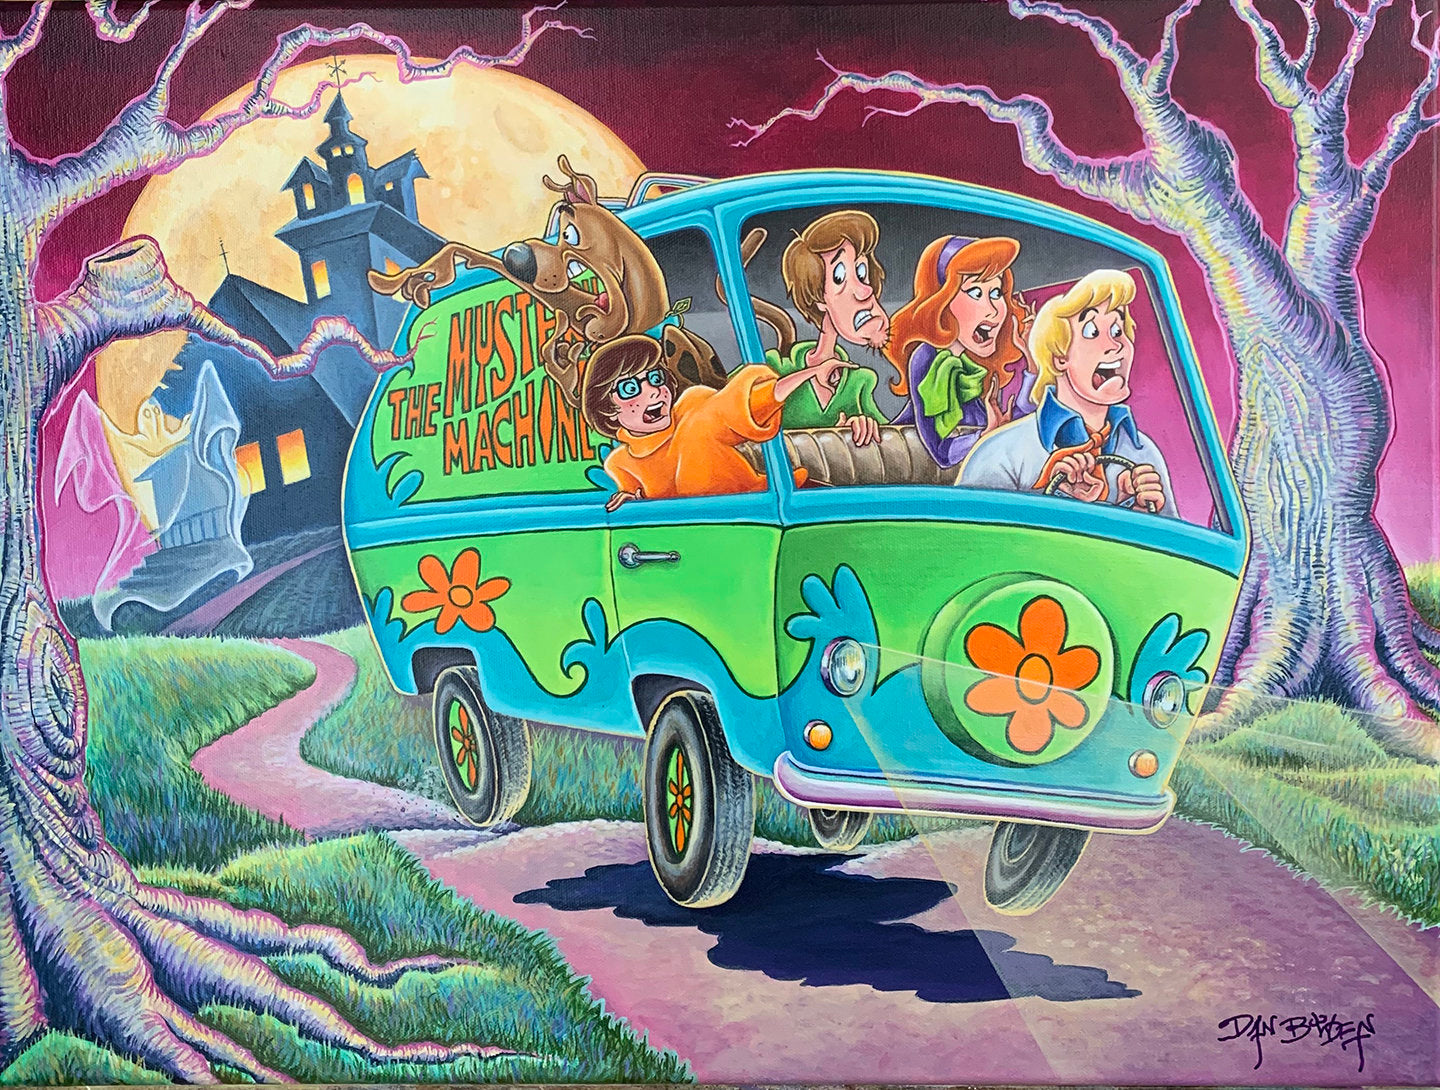 Scooby Doo Dan Bowden Signed 2020 Hanna Barbera Limited Edition Print of 200